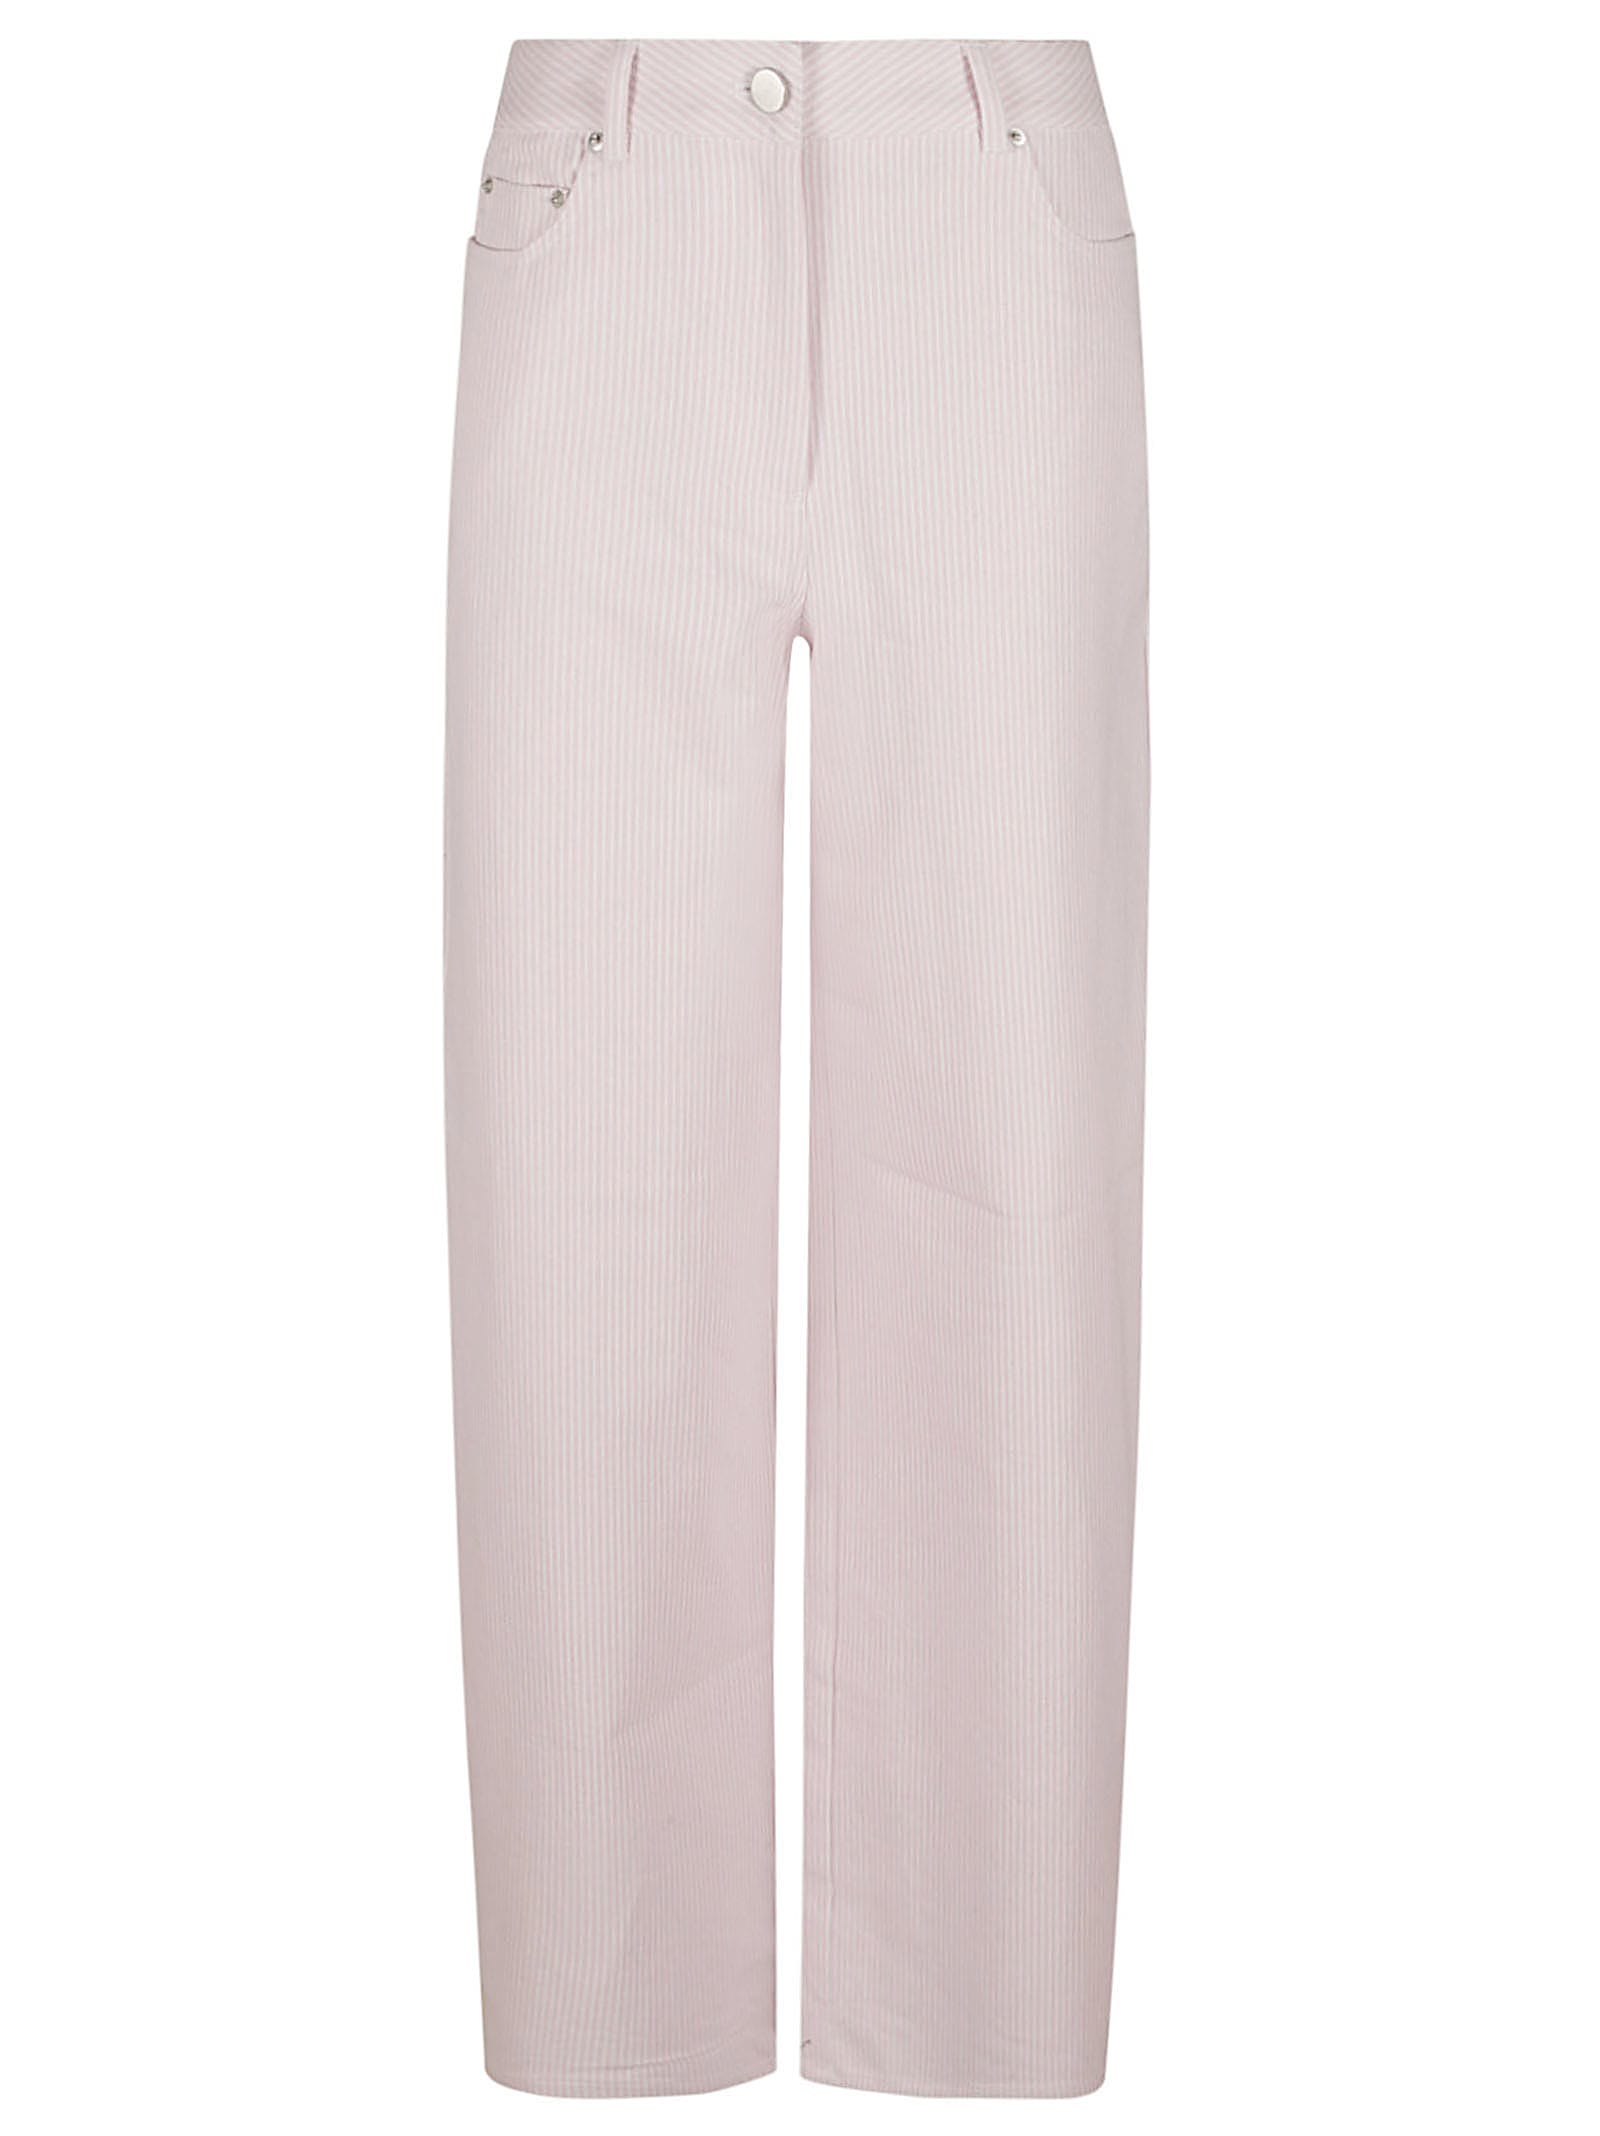 Cocoon Striped Trousers